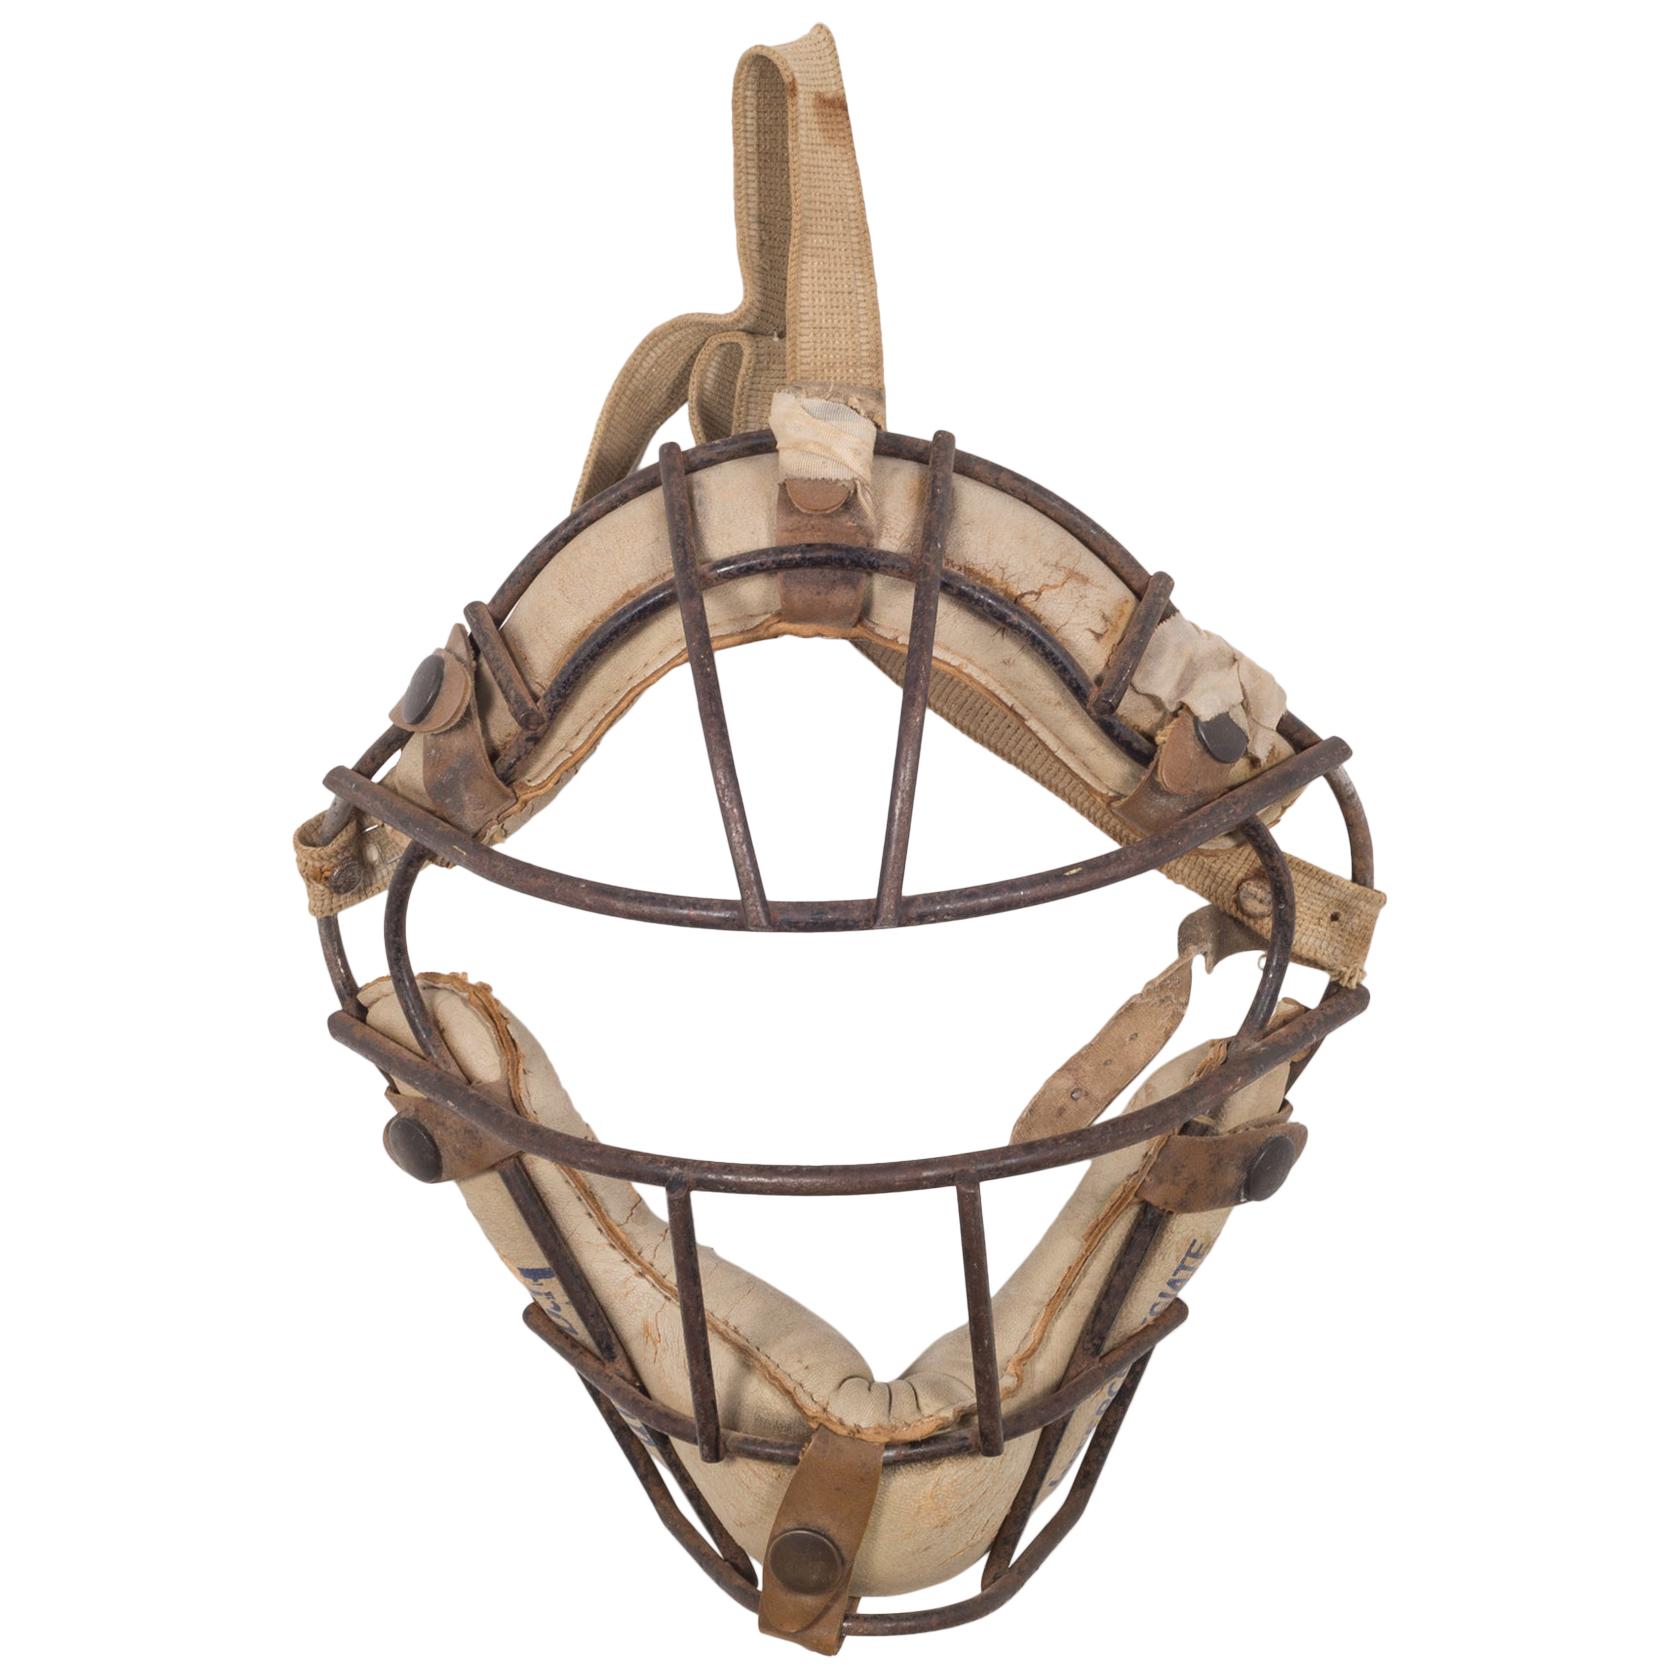 Franklin Steel and Leather Catcher's Mask, c.1940